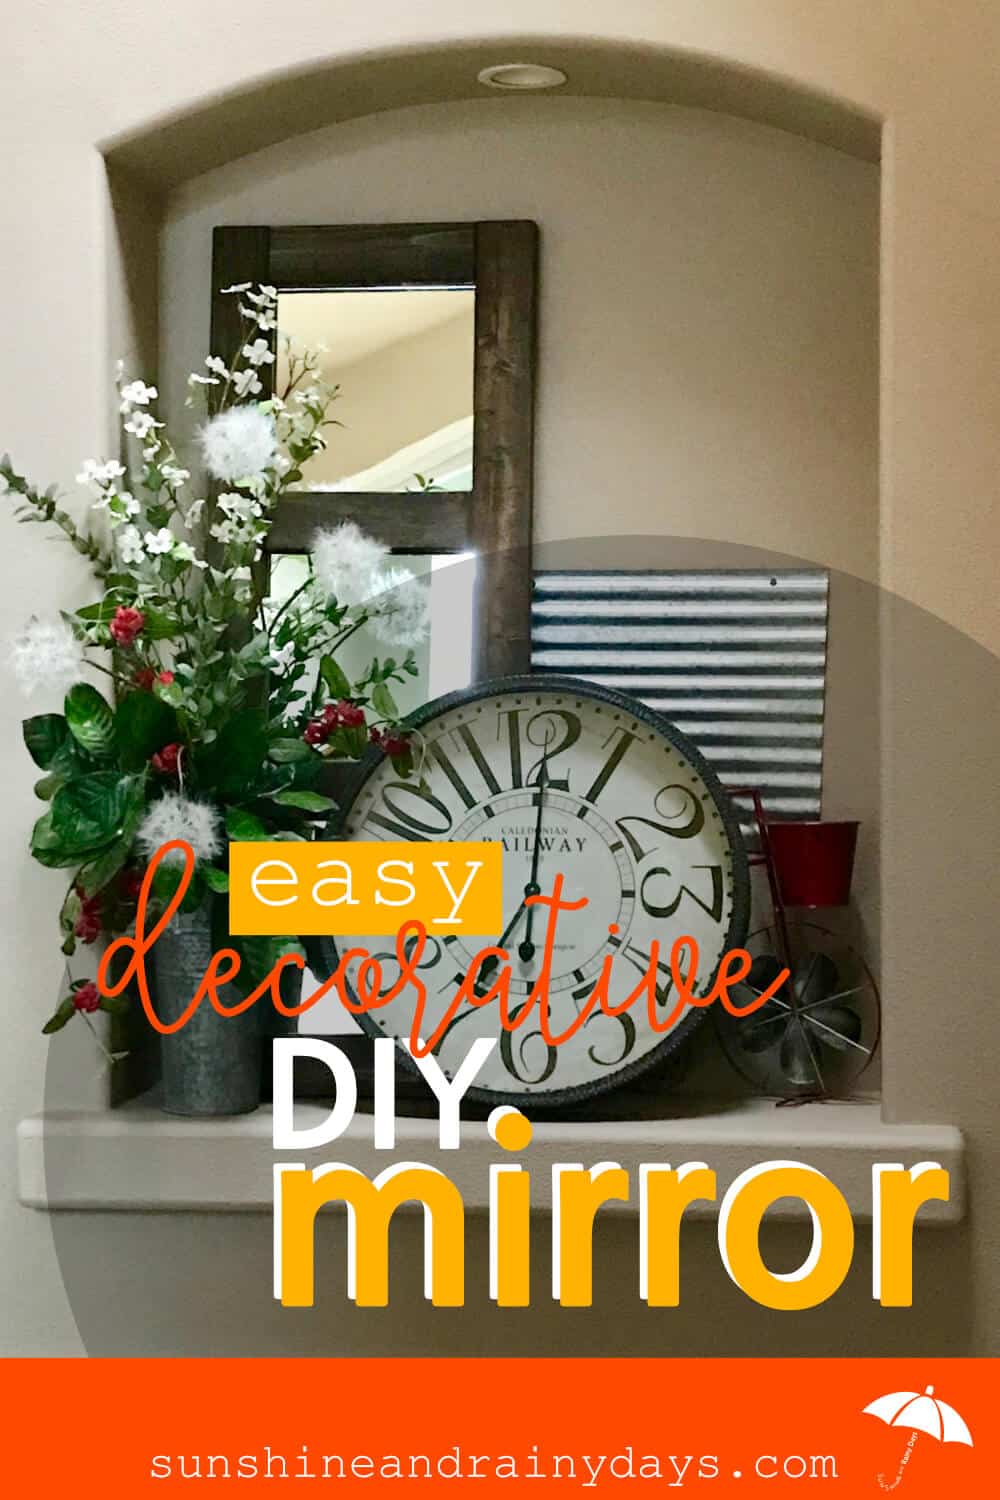 Check out how EASY this Decorative DIY Mirror is to make! There's no need to buy expensive materials to make this mirror. Simple 2 X 4's will do the job!